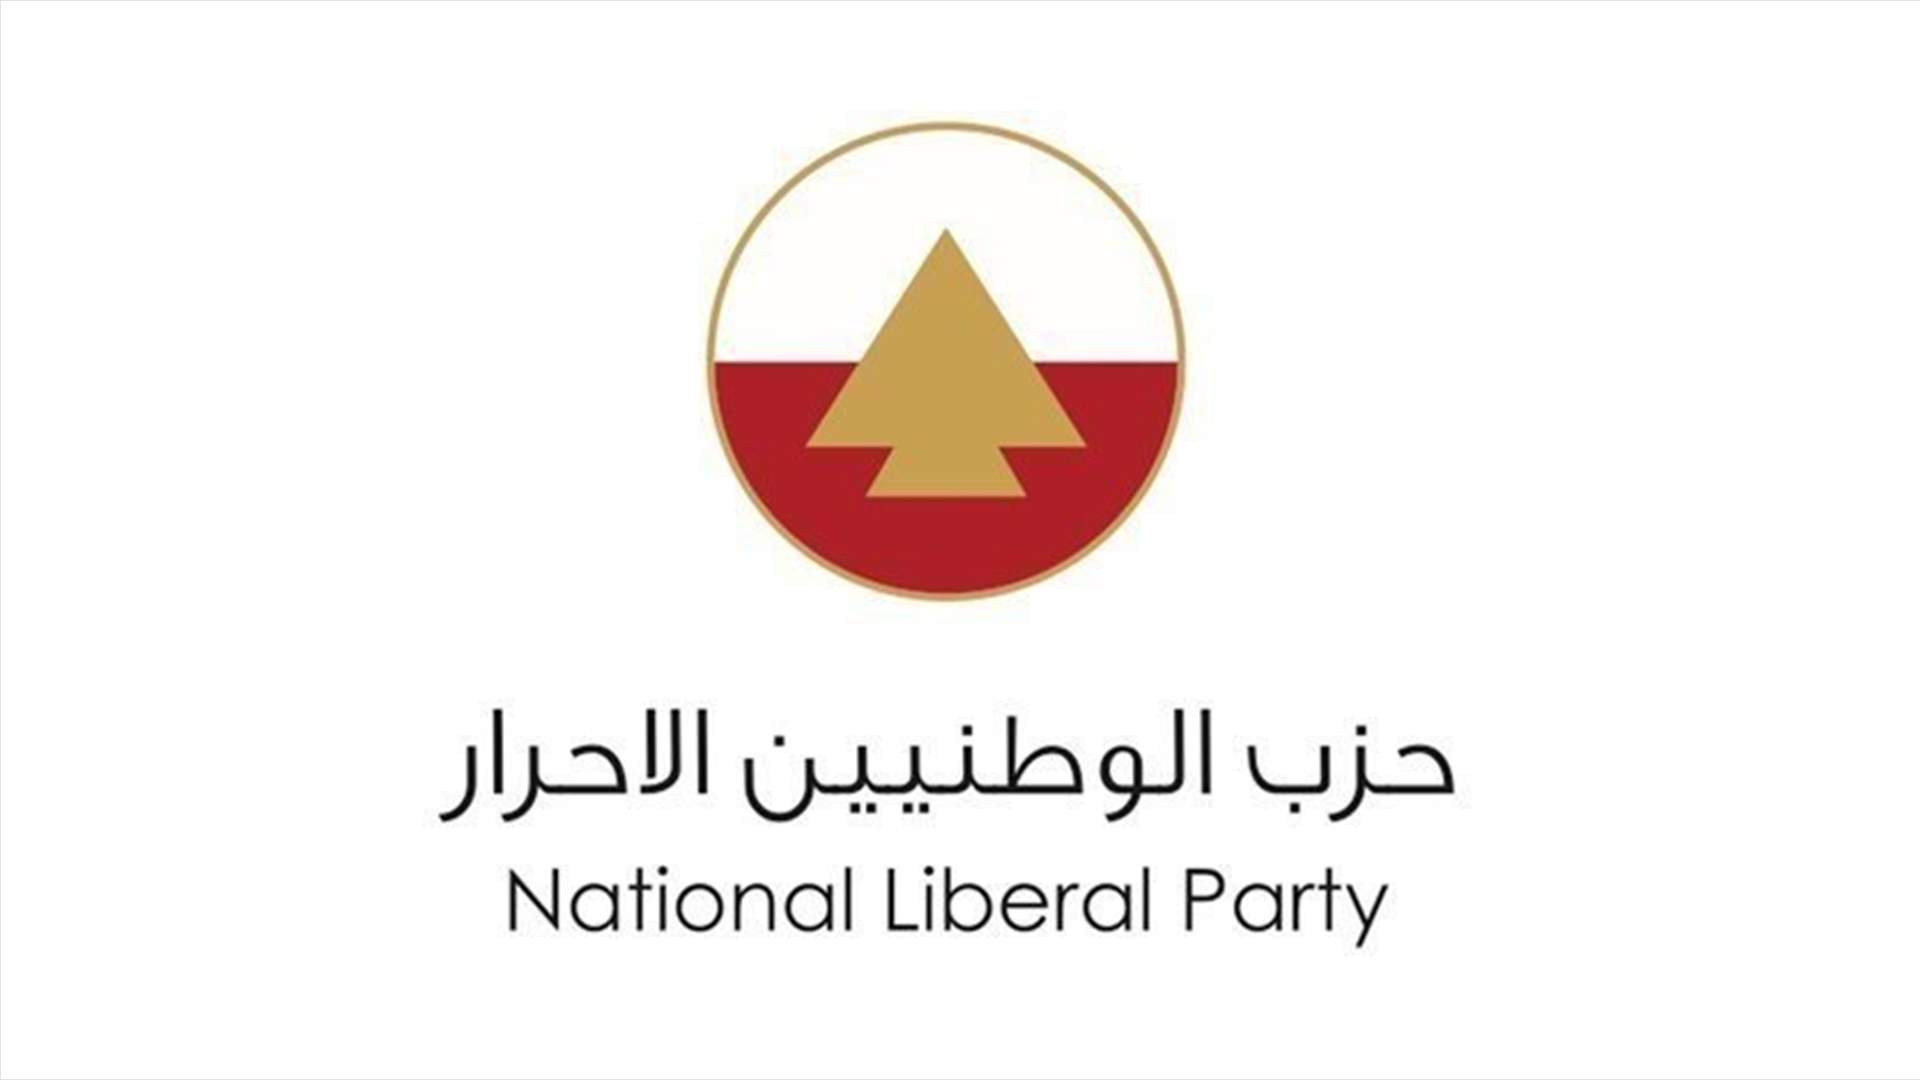 National Liberal Party condemns what happened in Dental Association elections